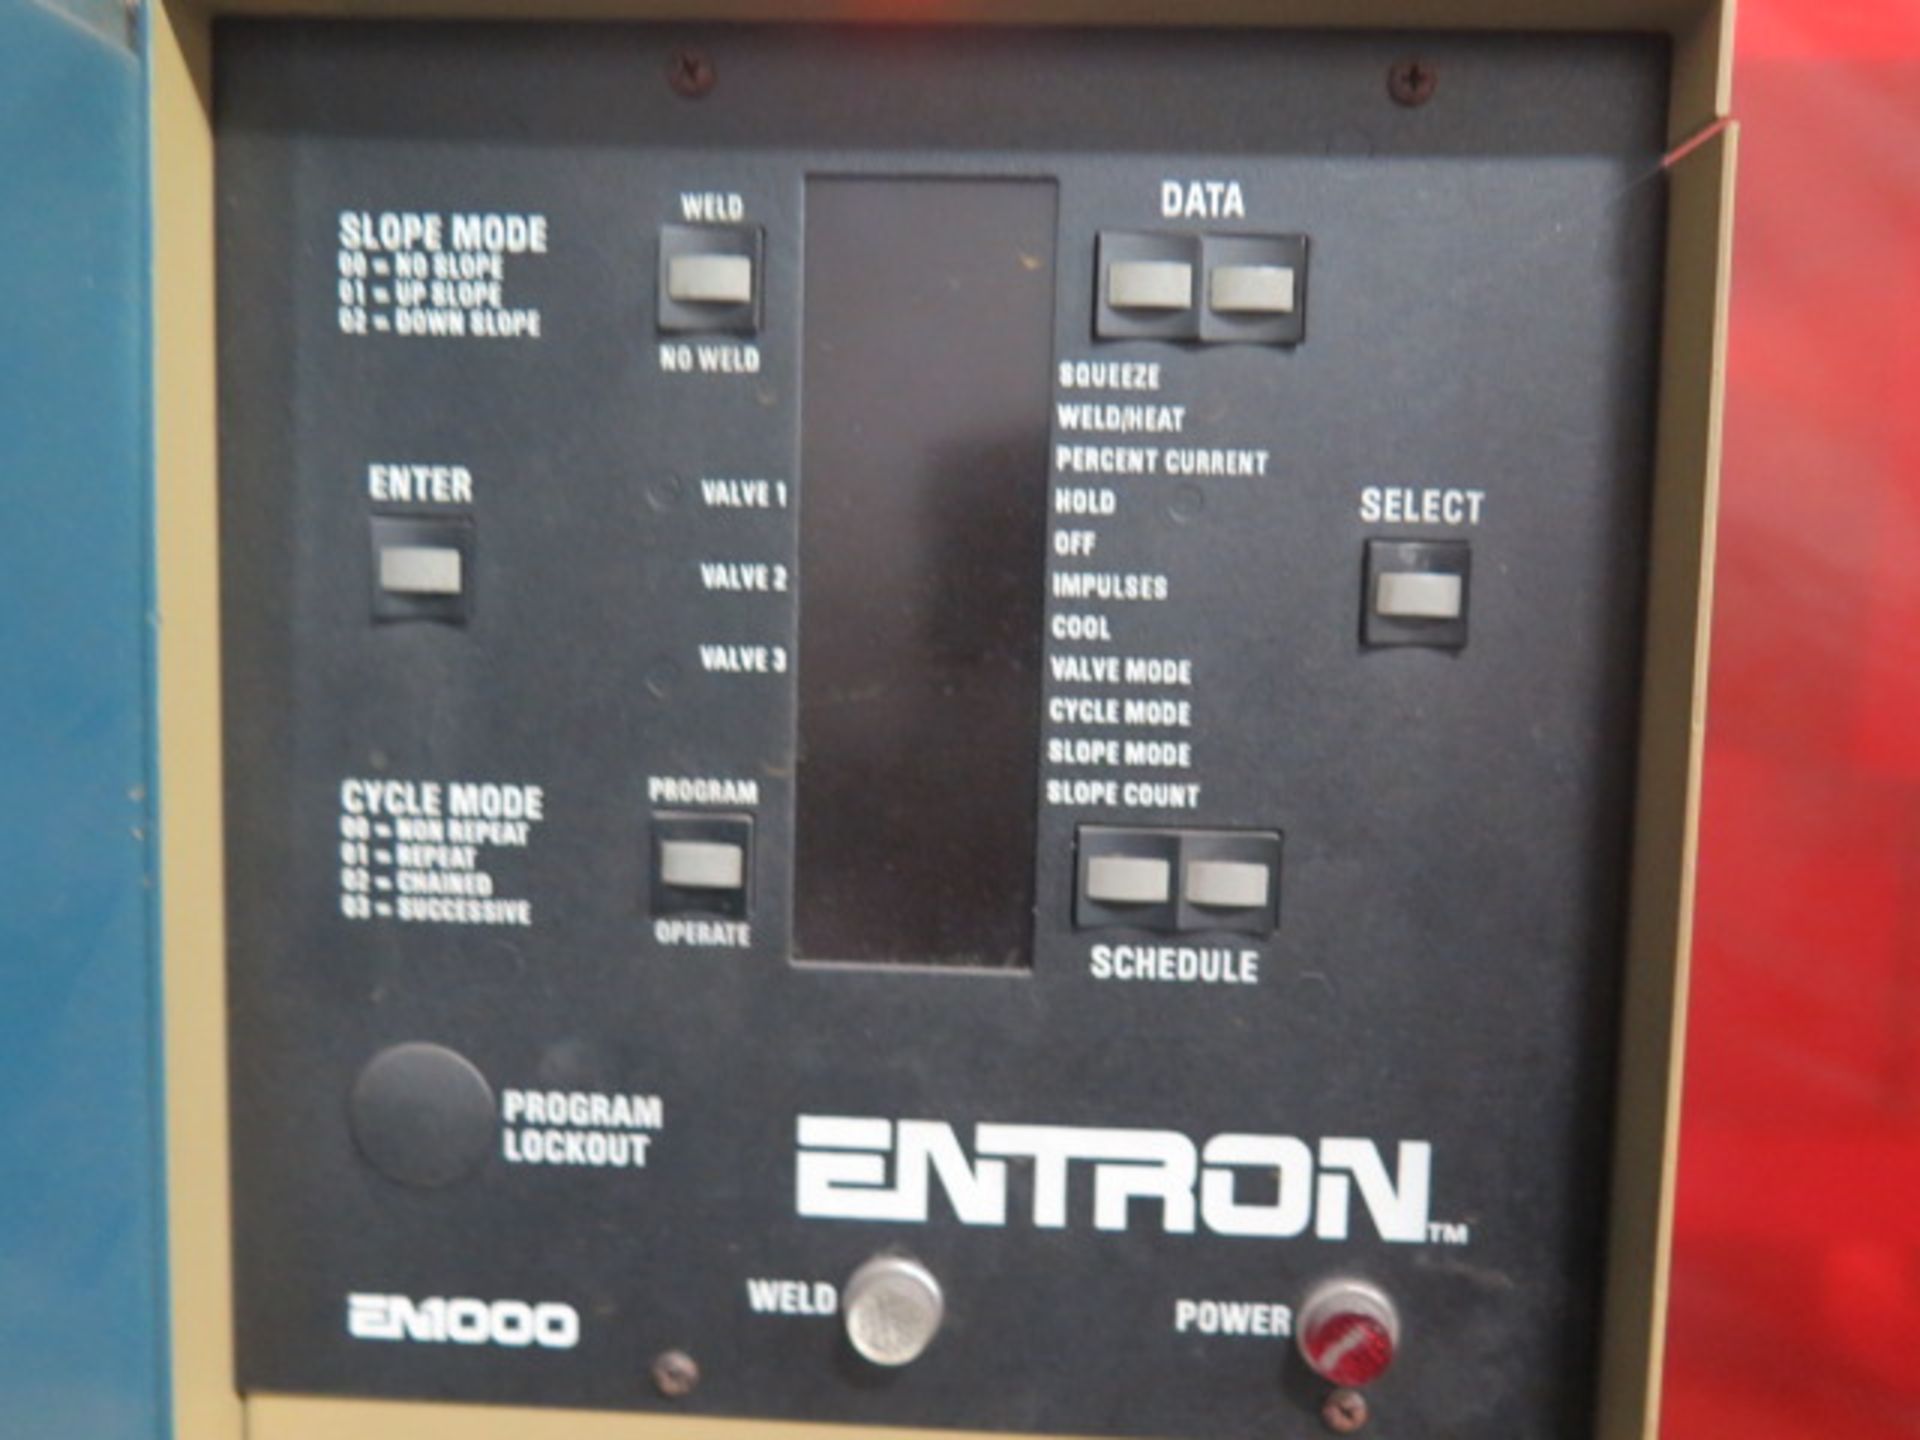 Entron Pneumatic Actuated Spot Welder s/n 10599 w/ Entron Controls (SOLD AS-IS - NO WARRANTY) - Image 10 of 10